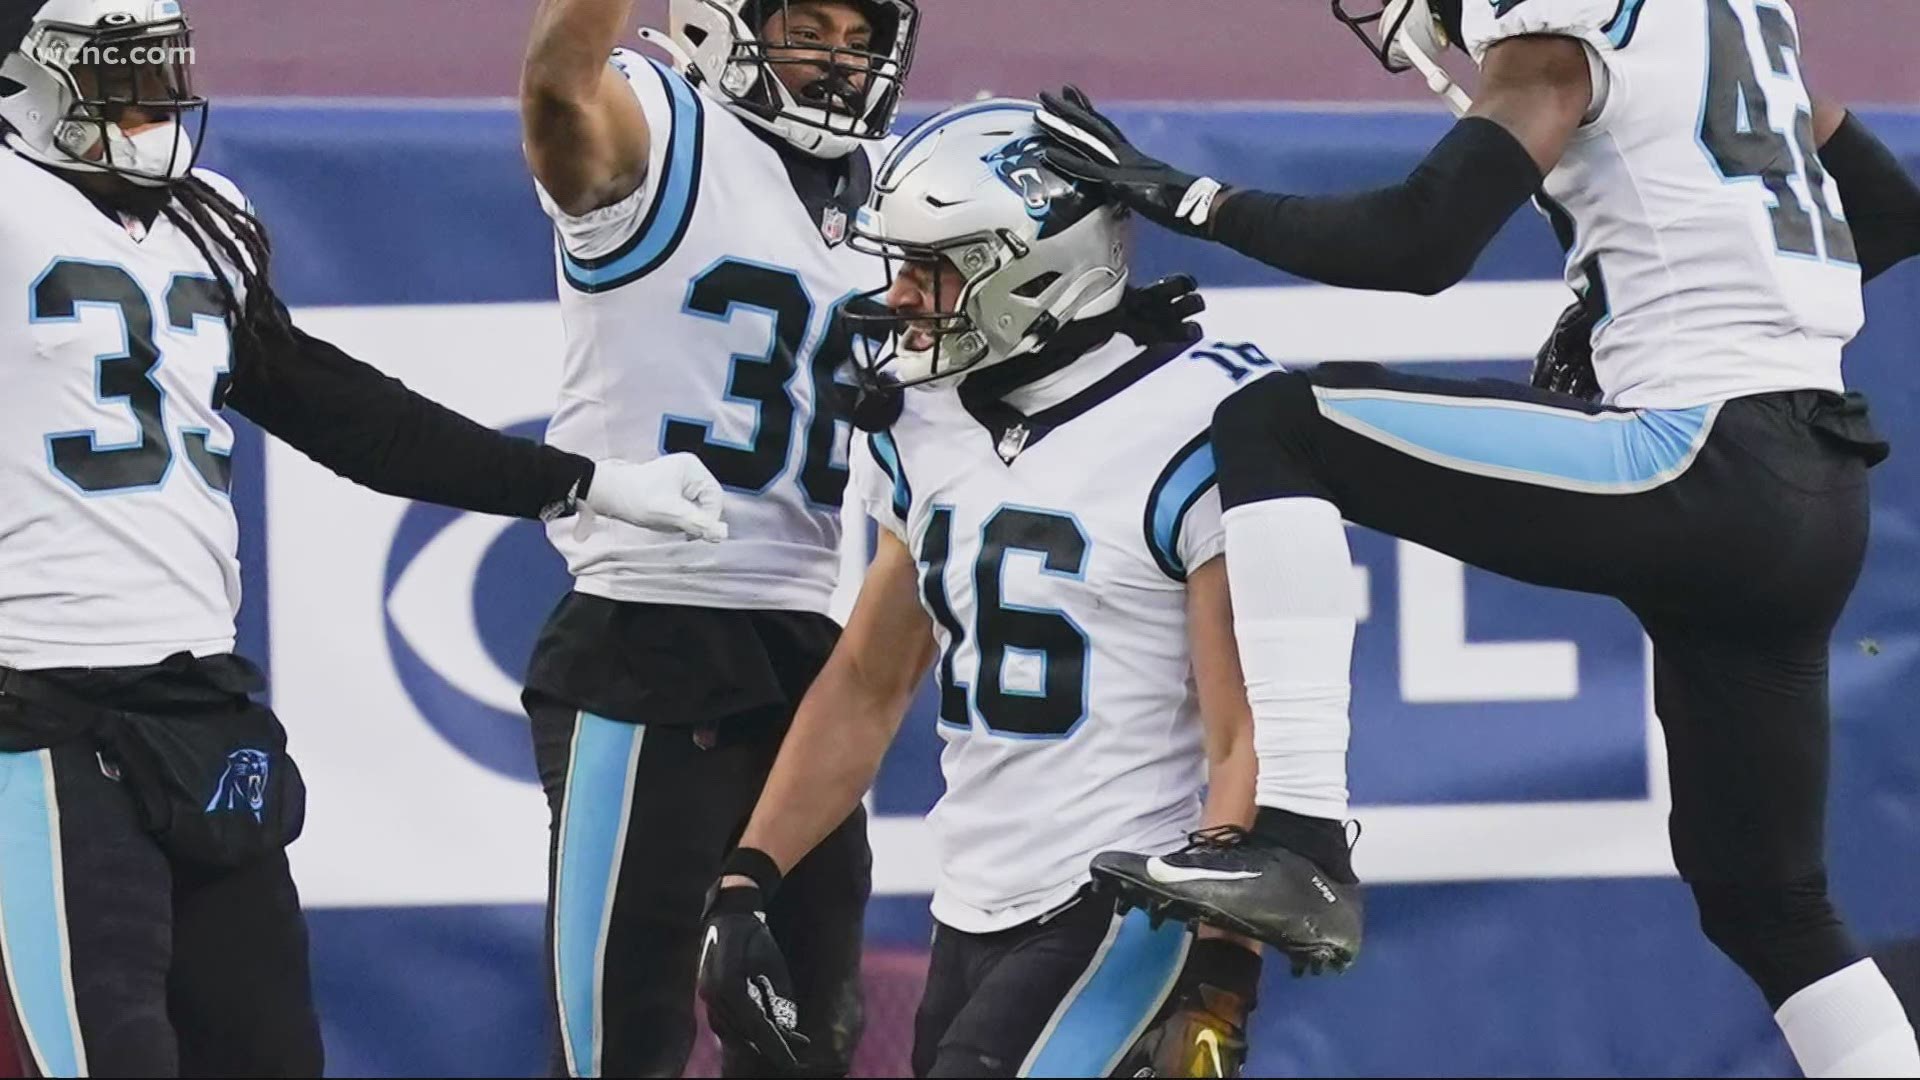 Former Panther and WCNC Charlotte's Eugene Robinson joins Nick Carboni to look at the Panthers' win over Washington Sunday.